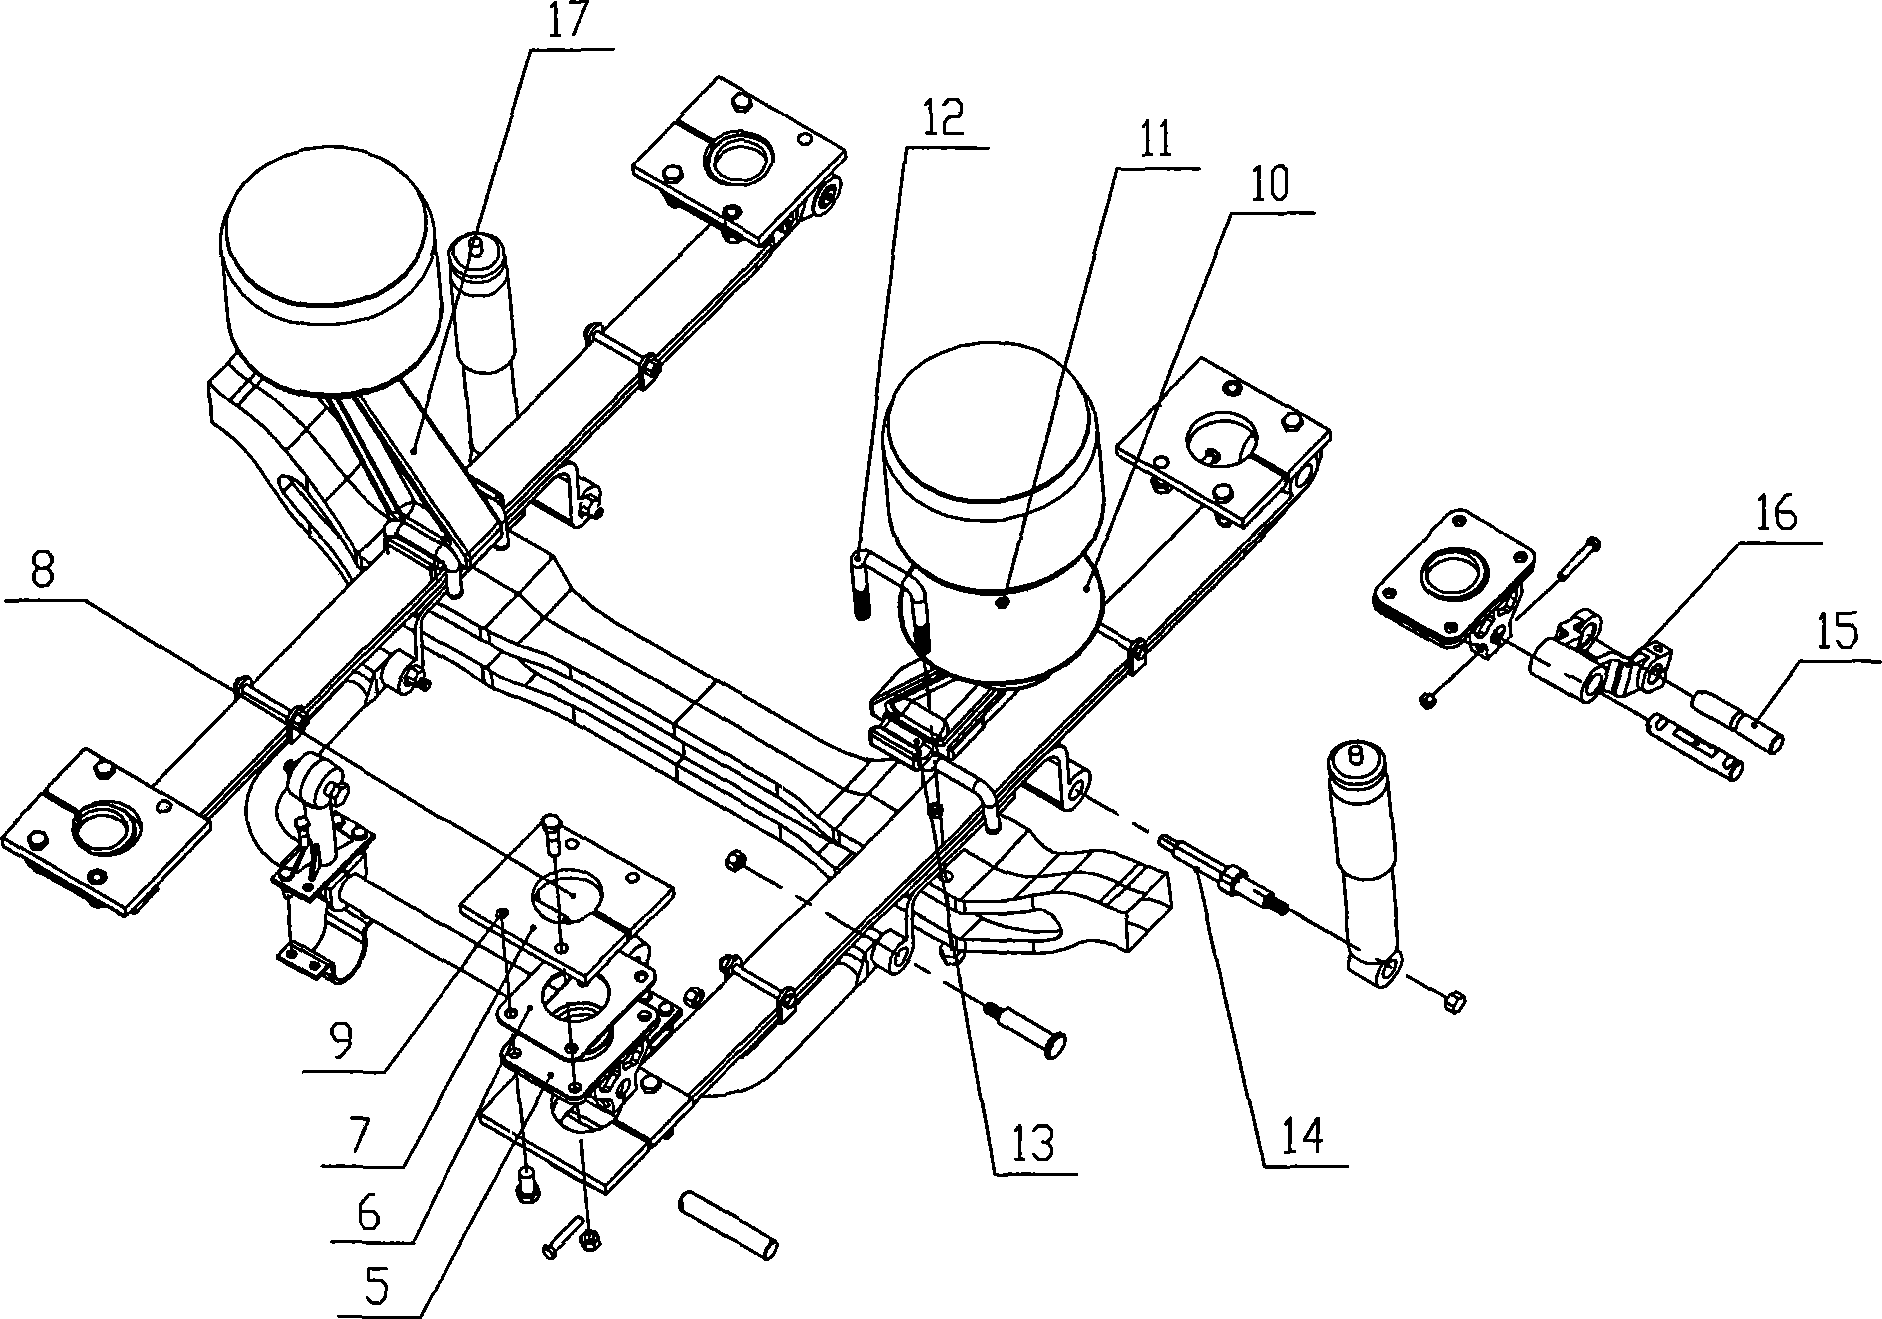 Special combined front suspension for large-scale bus